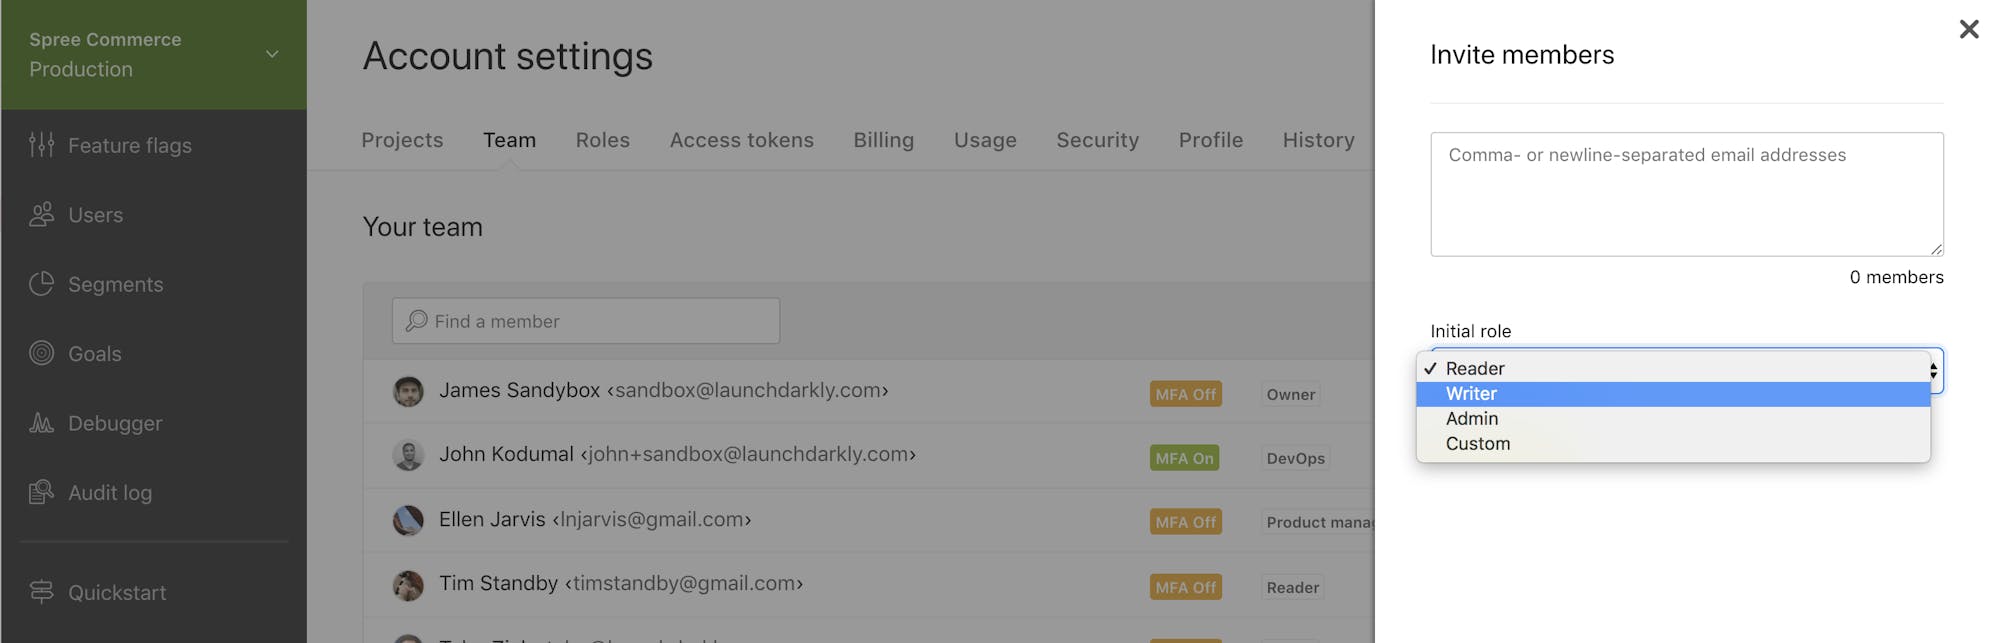 Launched: Bulk Invites for Team Members featured image